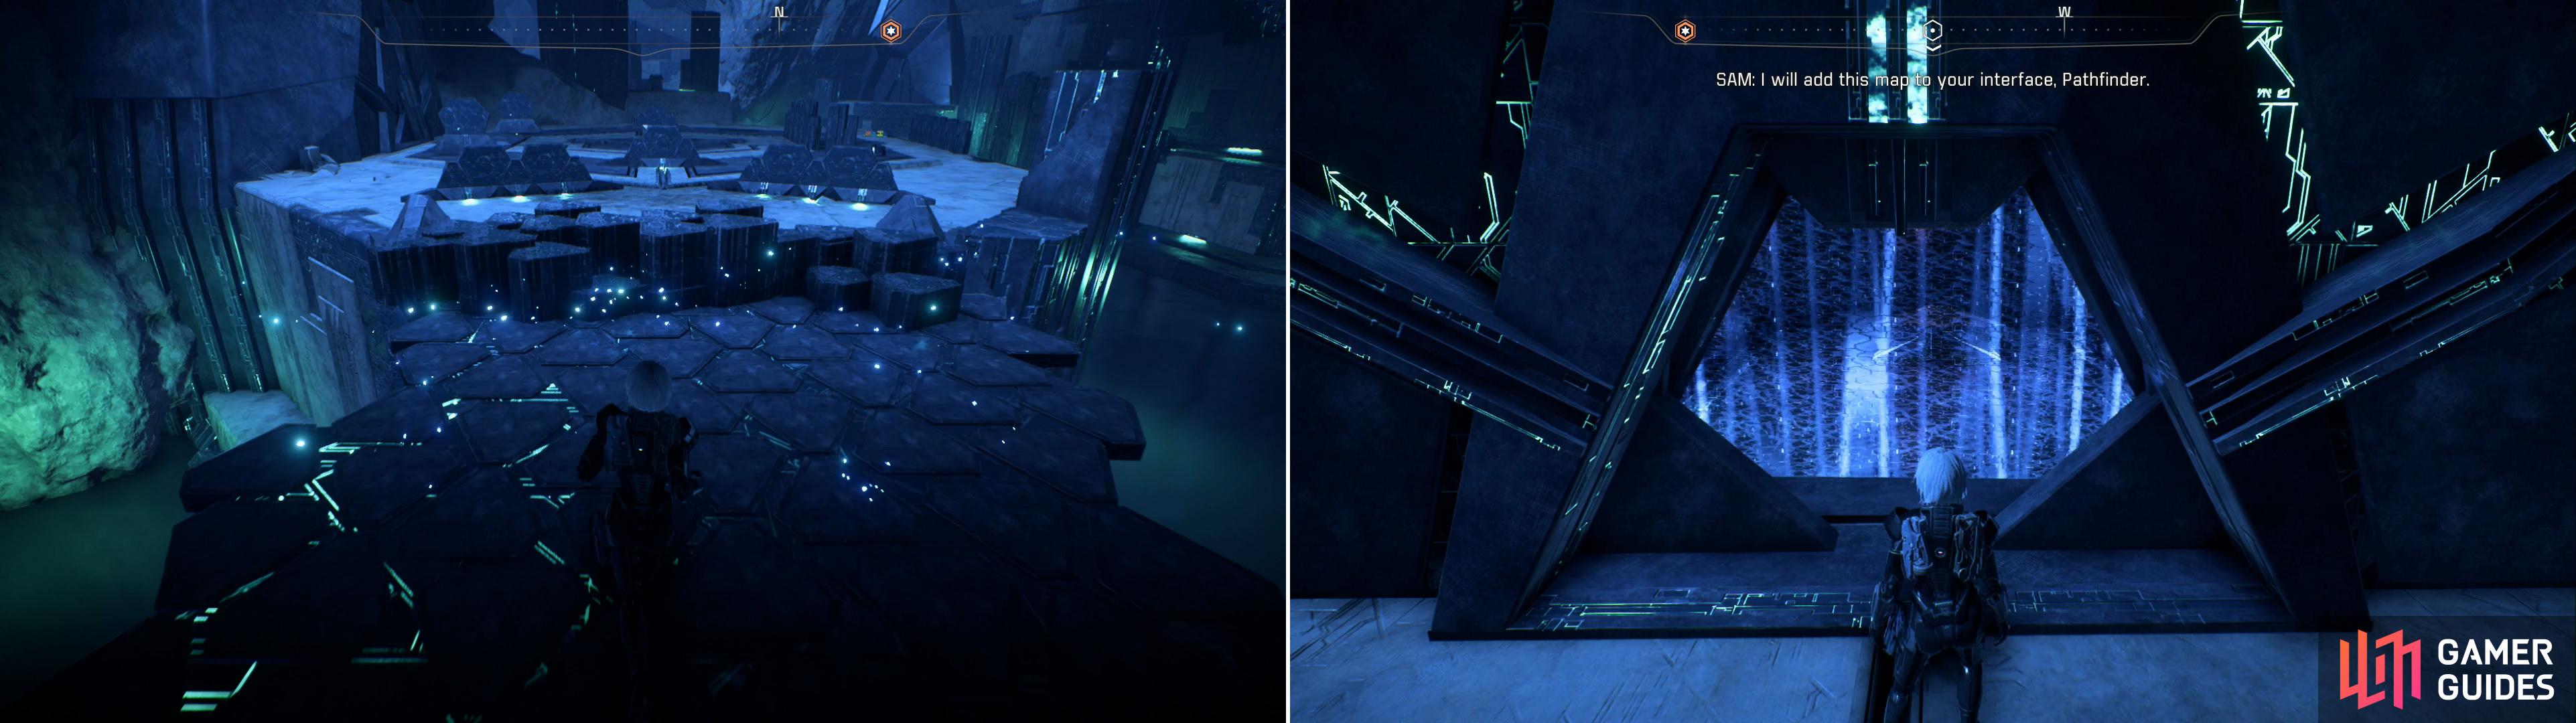 Don't activate the Remnant Console at the entrance to the vault proper, which will allow you to cross a Remnant bridge (left). Note the chamber behind the energy barrier, which is worth planning to return to as you flee the vault (right).